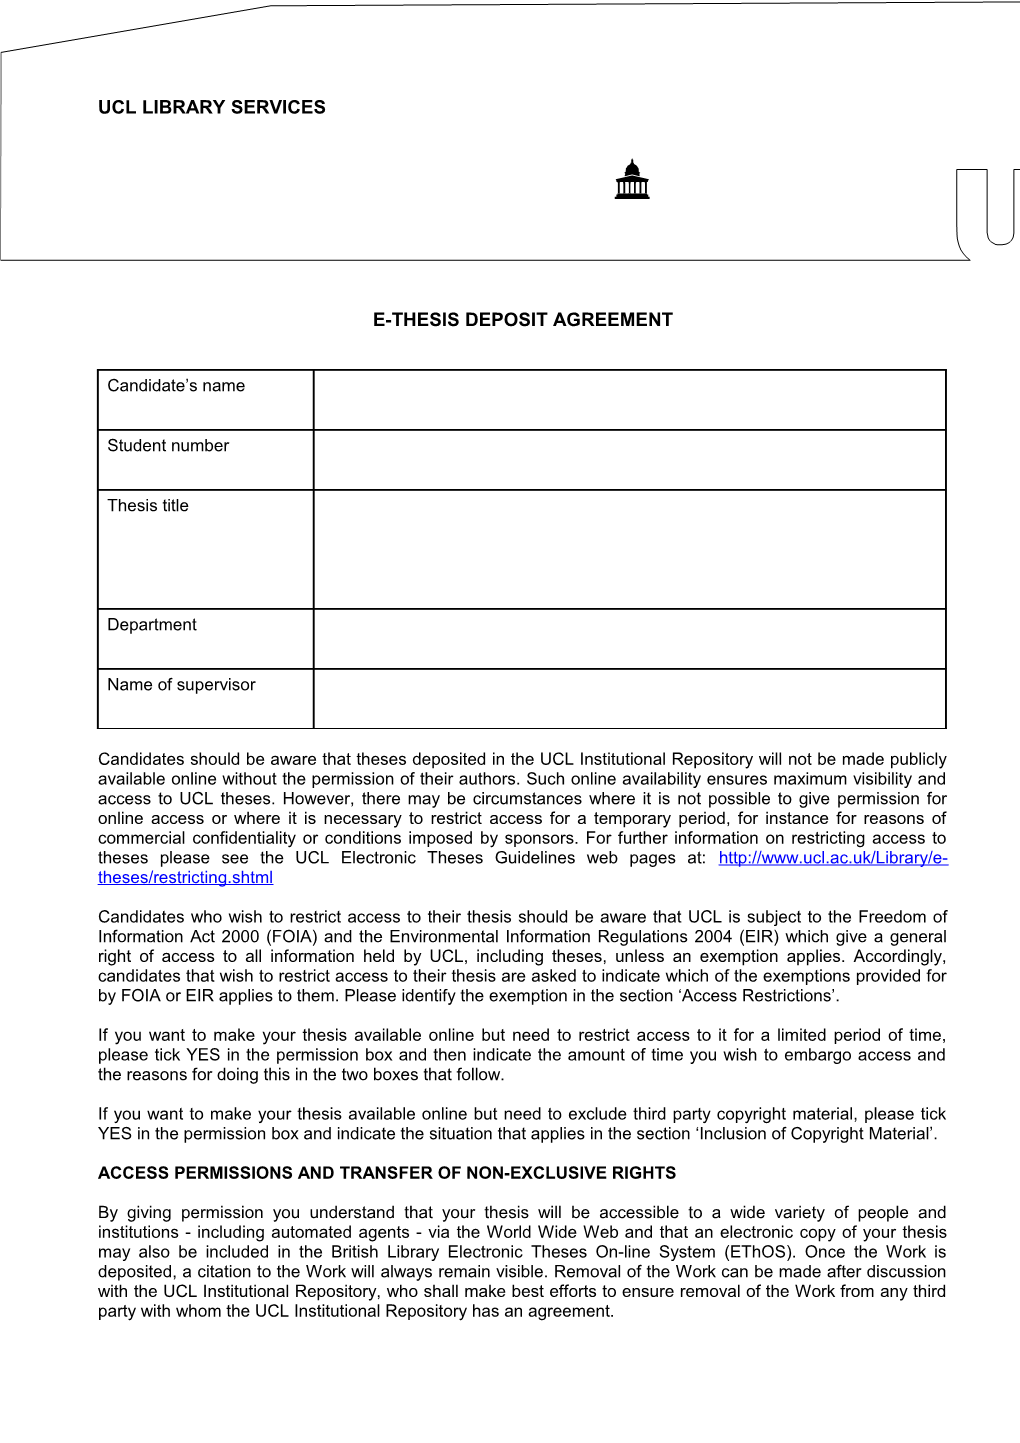 E-Thesis Deposit Agreement